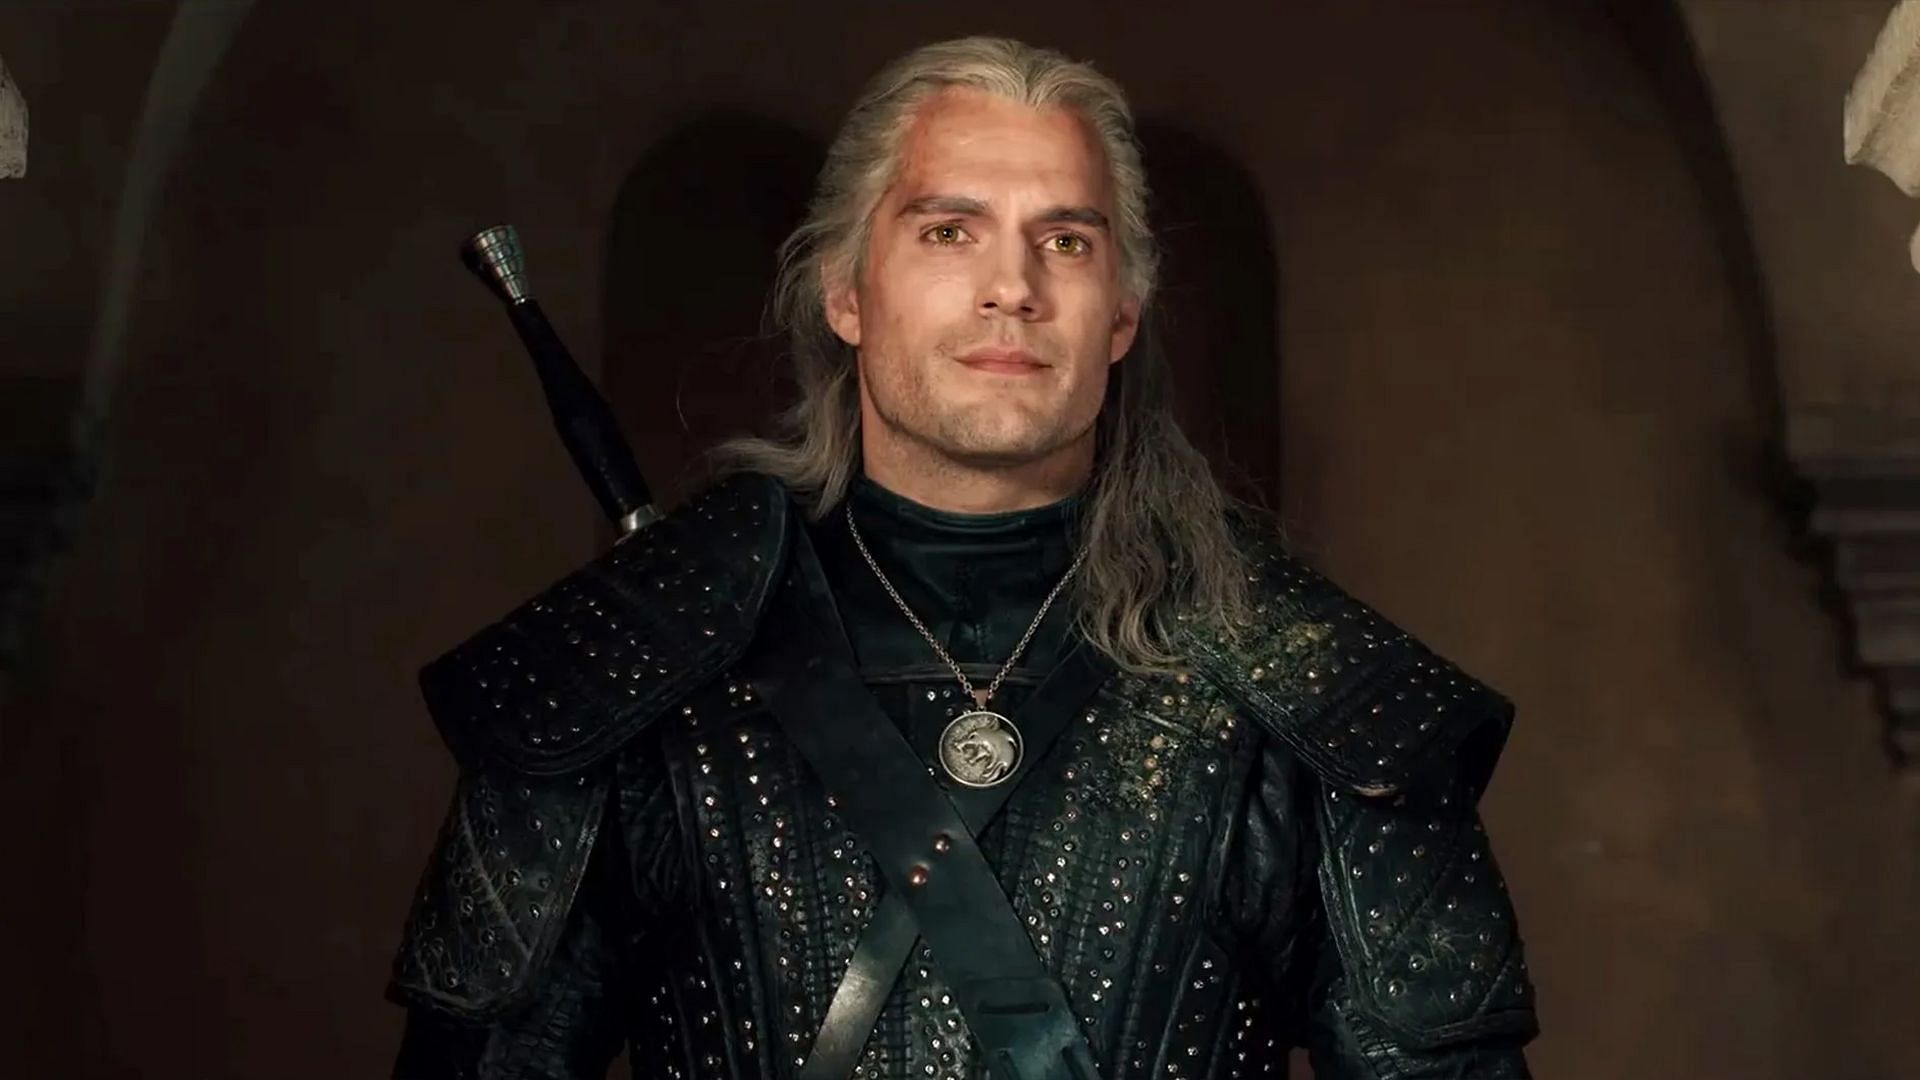 The Witcher season 2 release date, trailer, cast and everything we know so  far